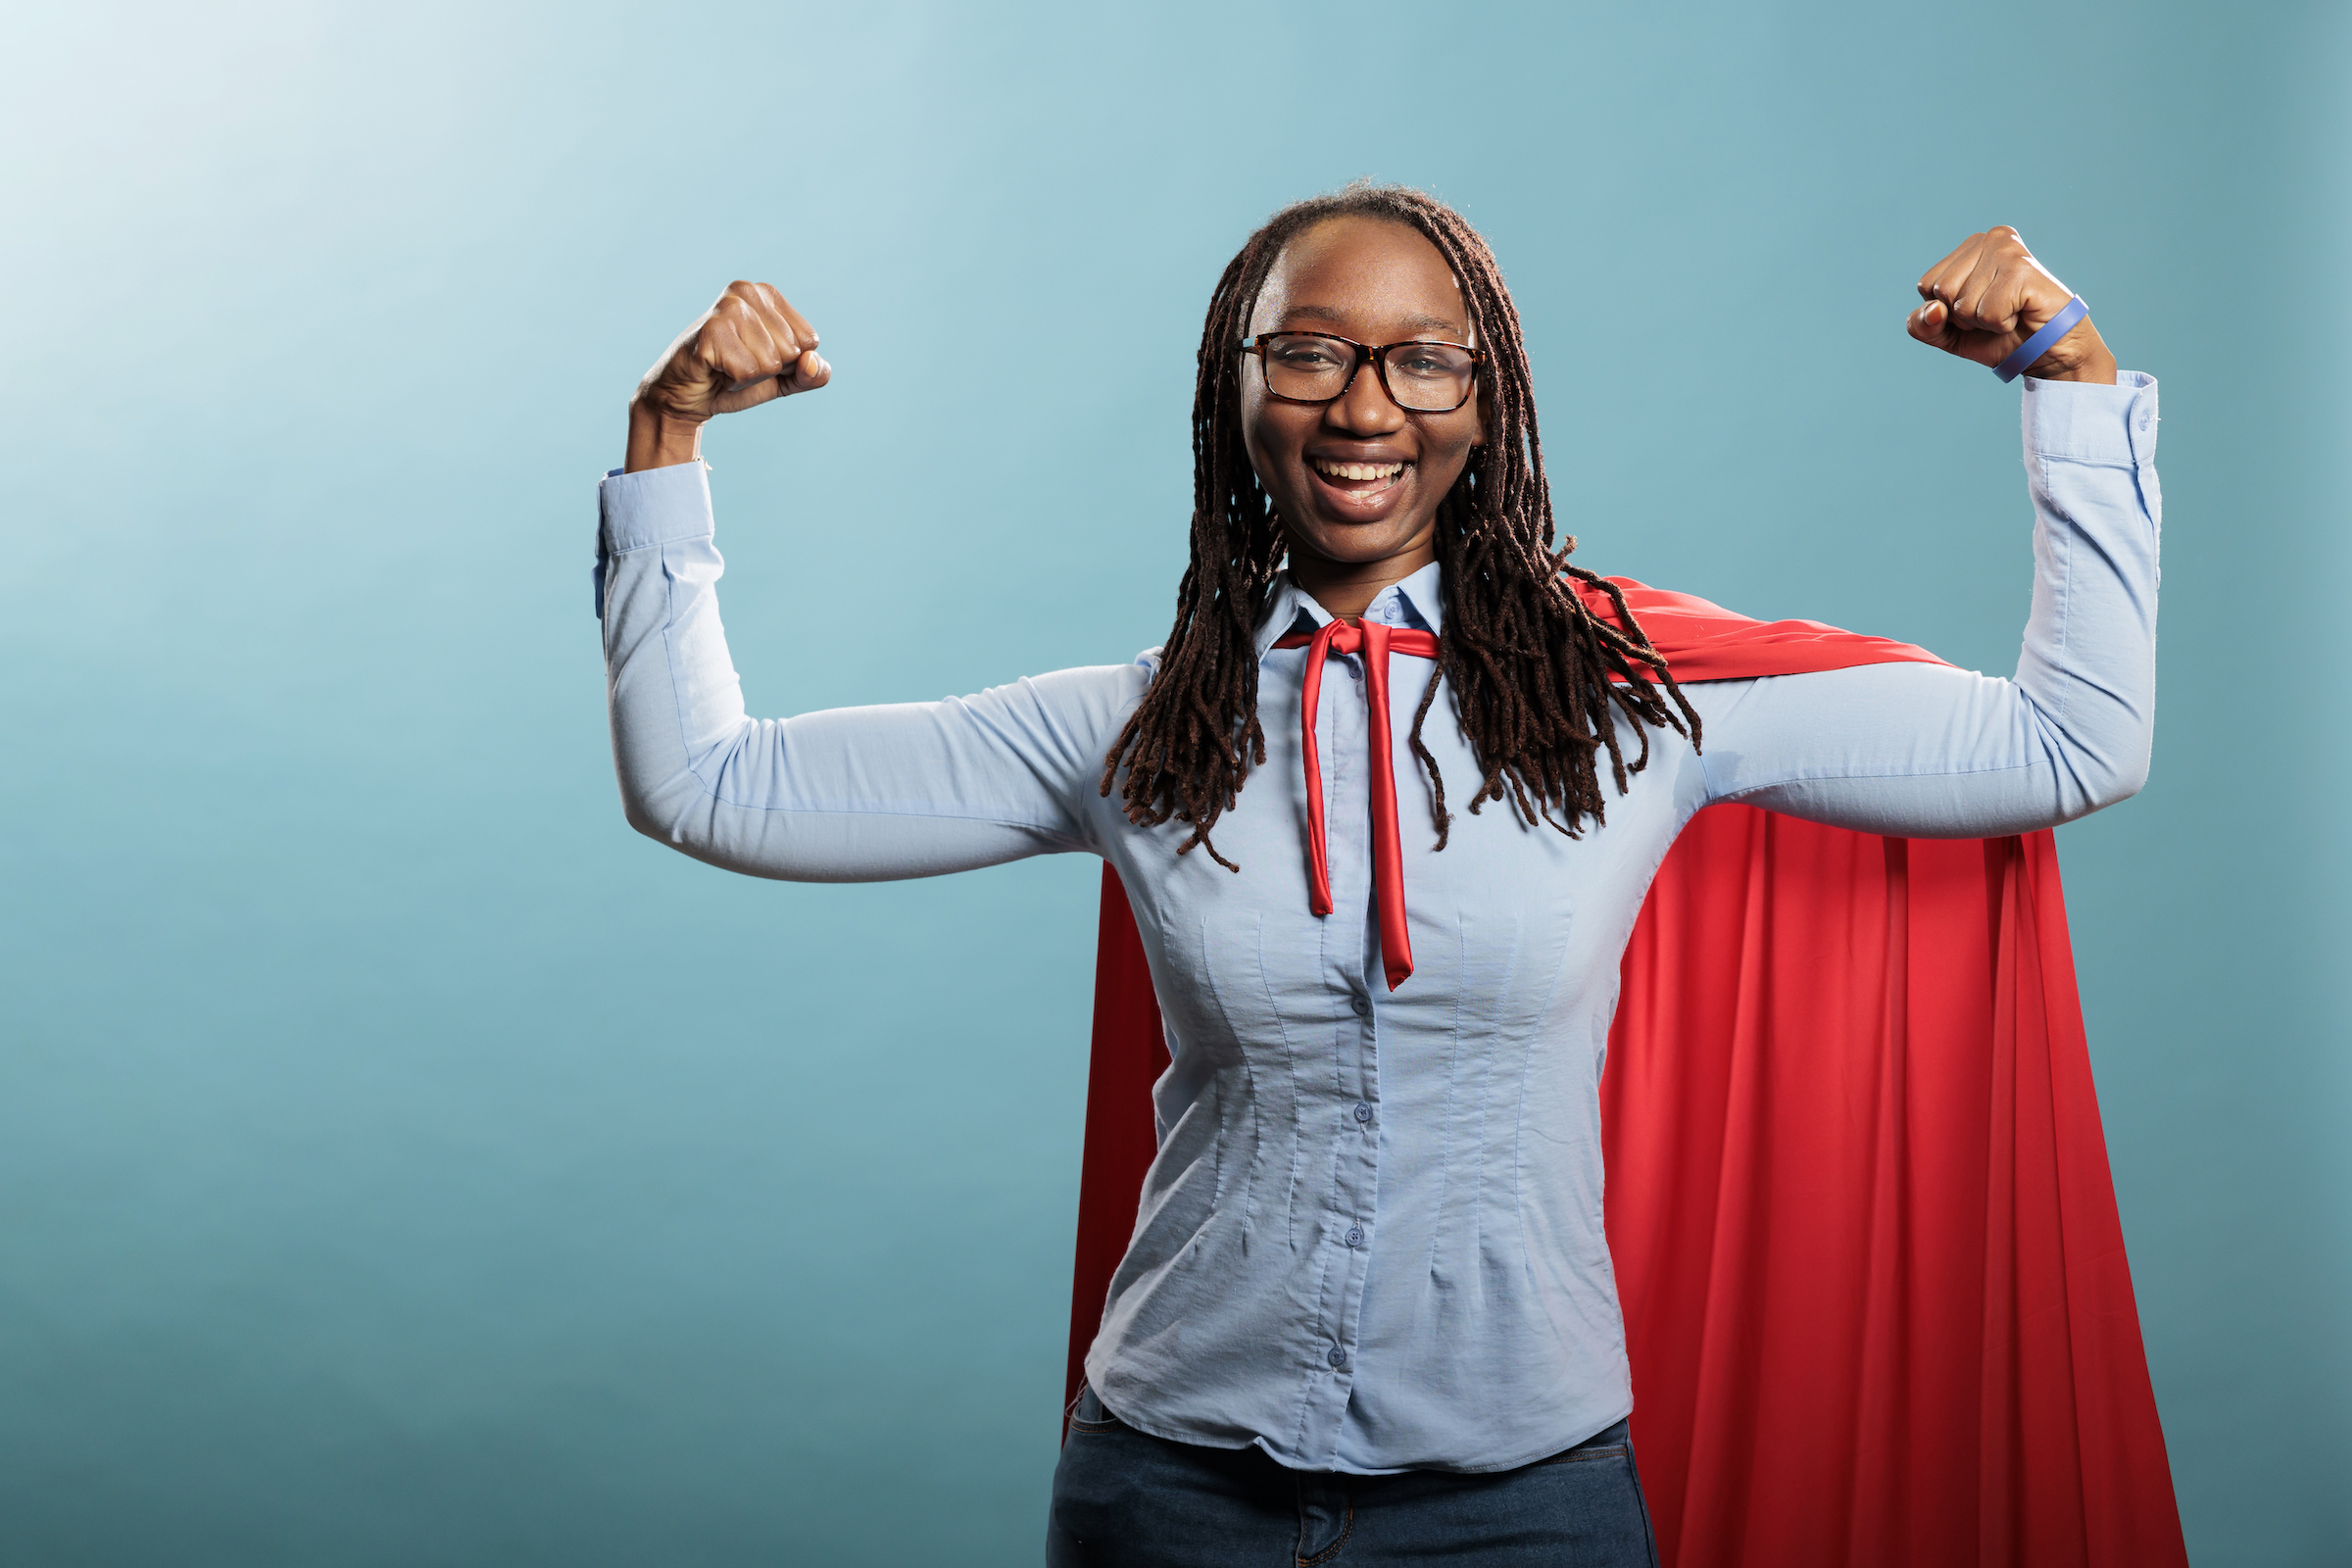 Happy positive justice defender flexing arms as a sign of strength while standing on blue background. Proud and tough looking young adult superhero woman showing empowerement and braveness.